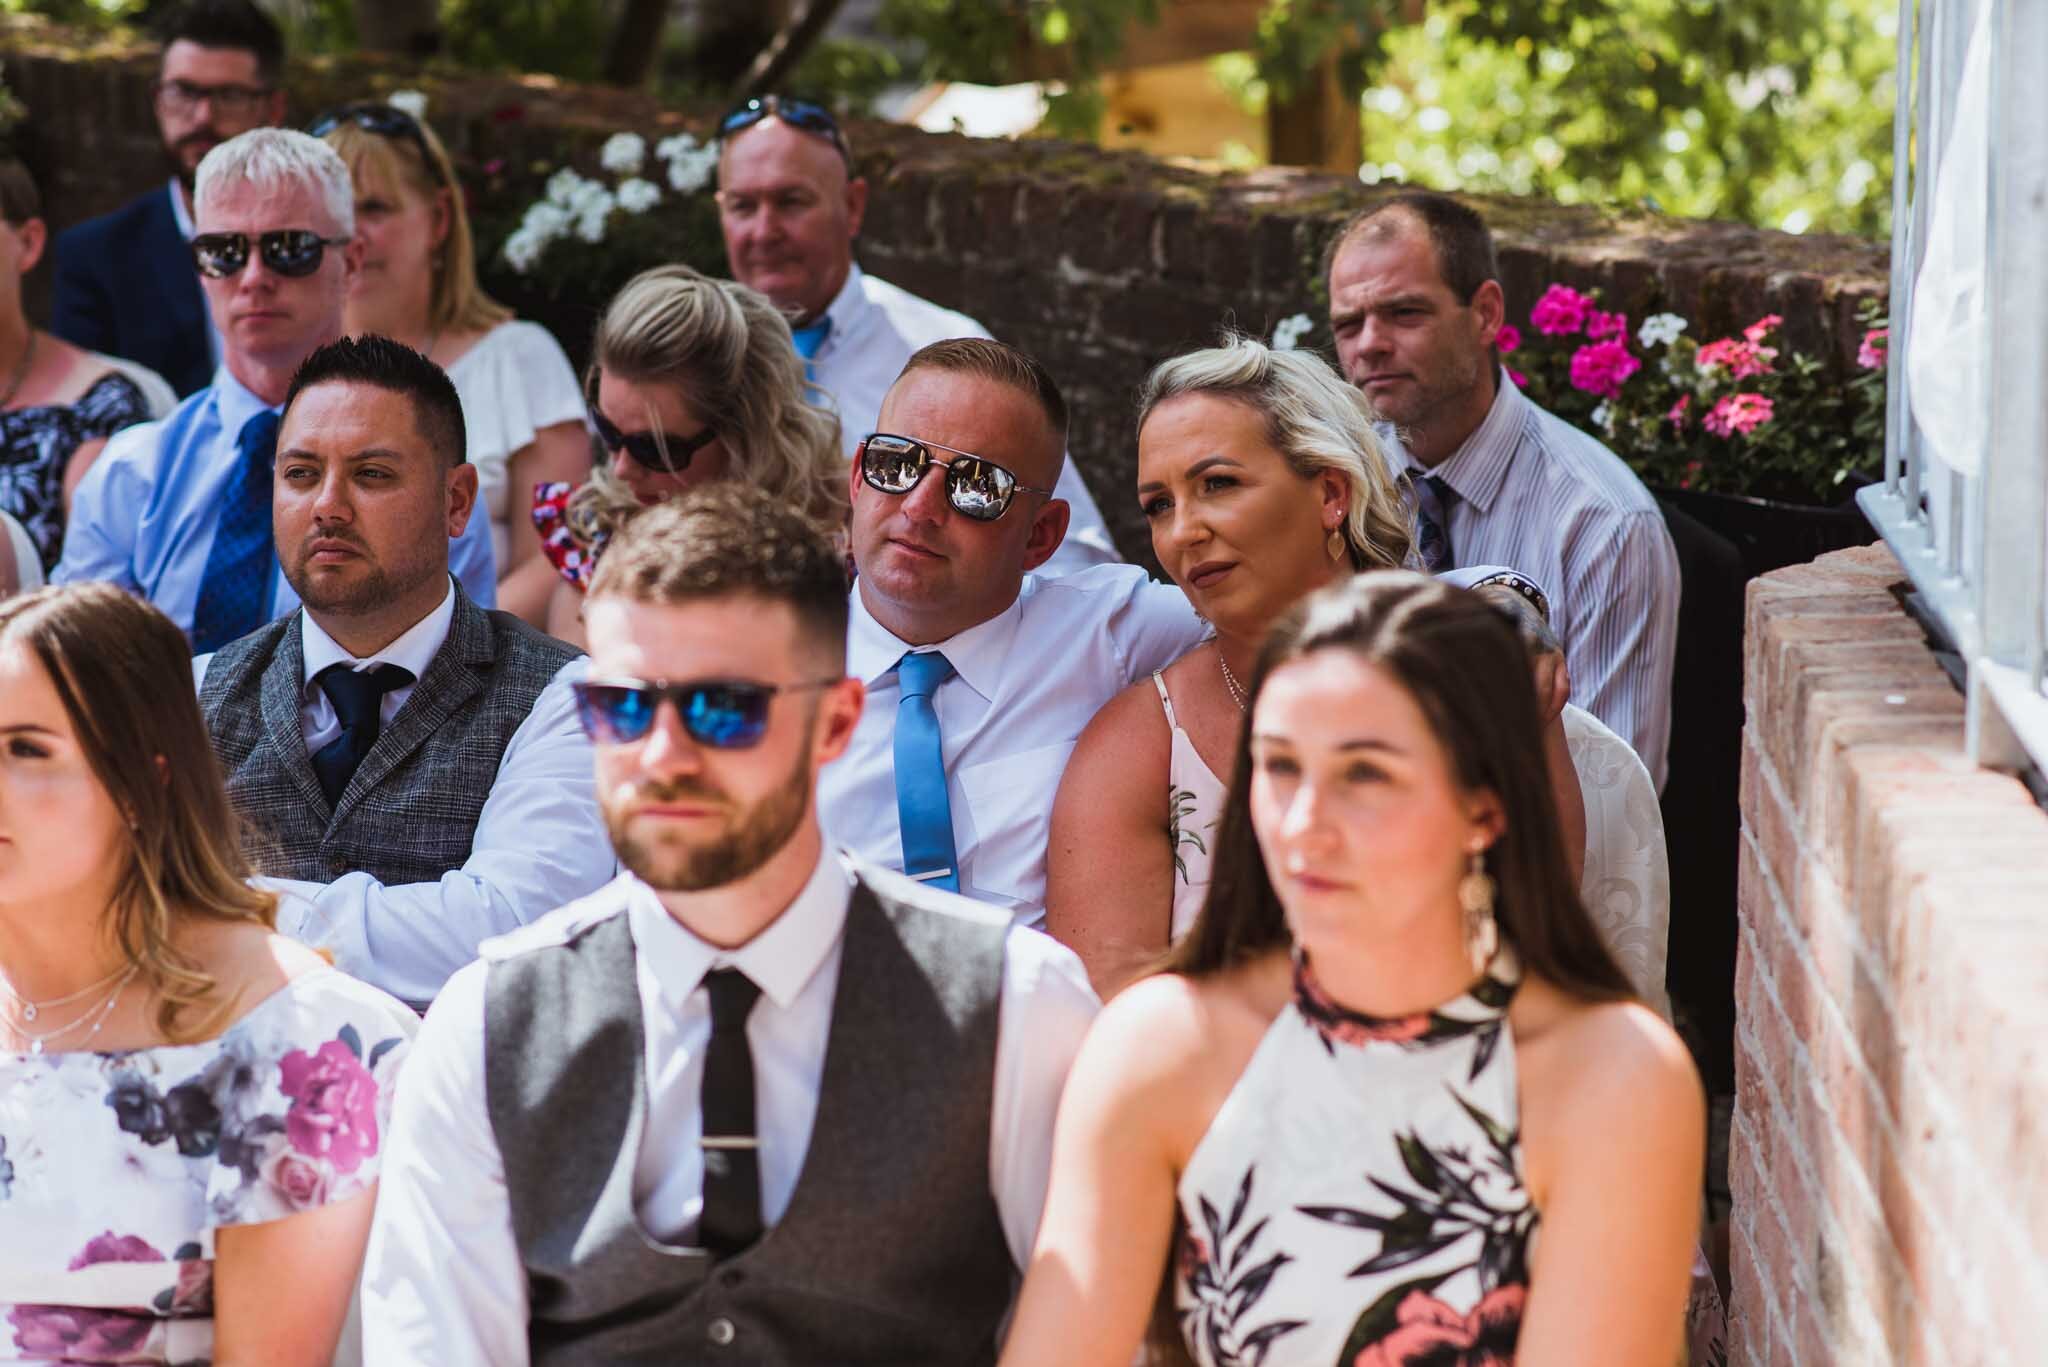  Guests some with sunglasses on a hit summer’s day in Templepatrick wedding. 